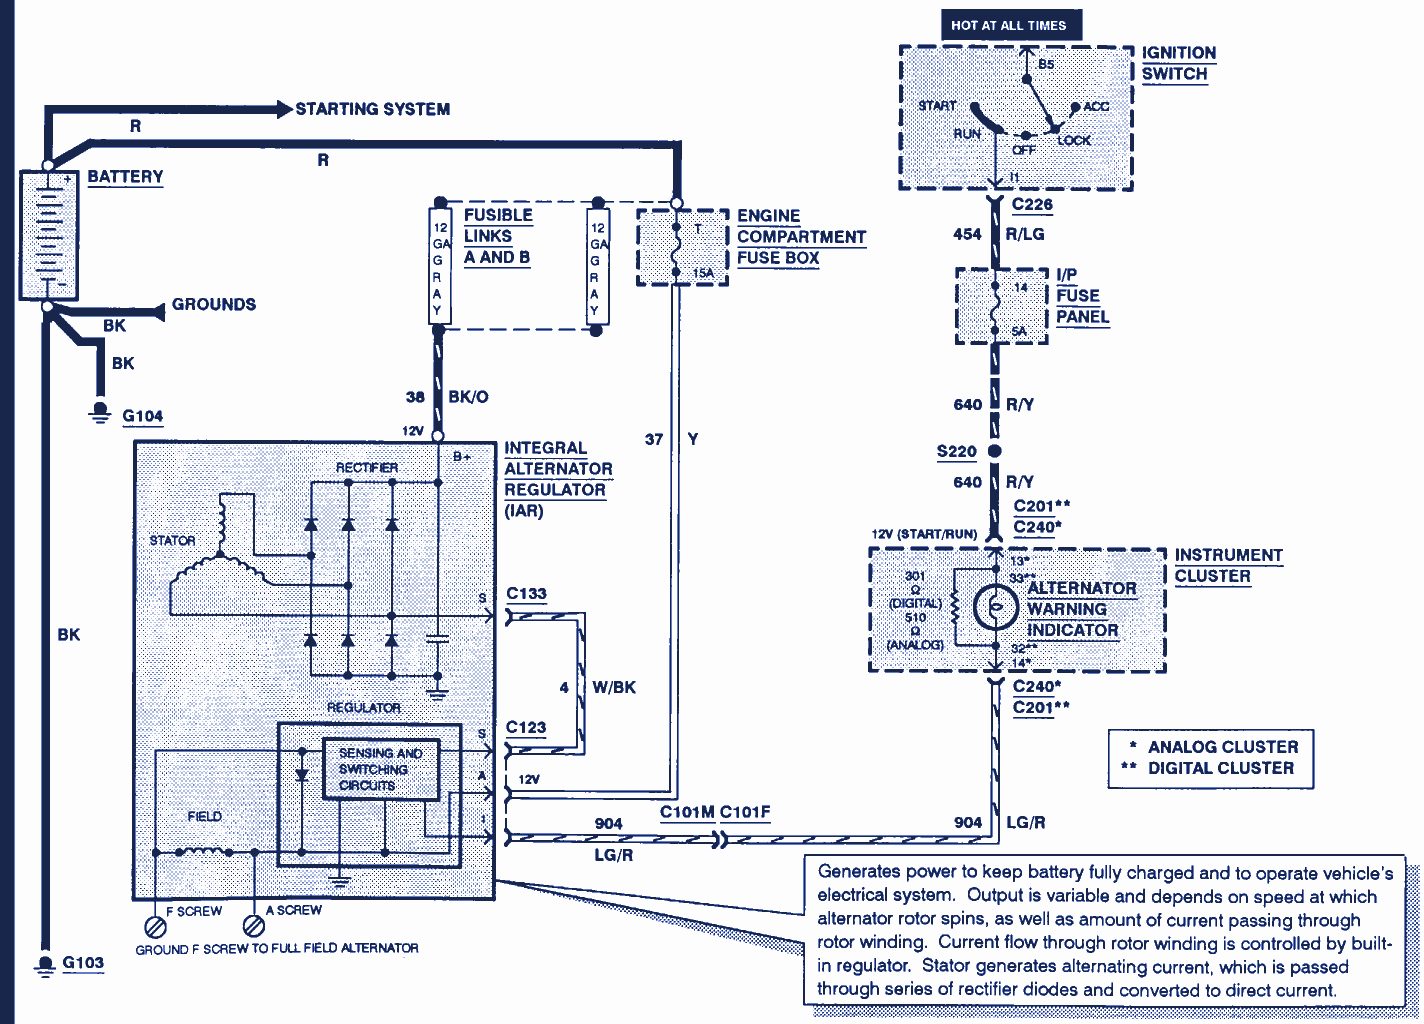 2002 Ford Expedition Stereo Wiring Diagram from 3.bp.blogspot.com